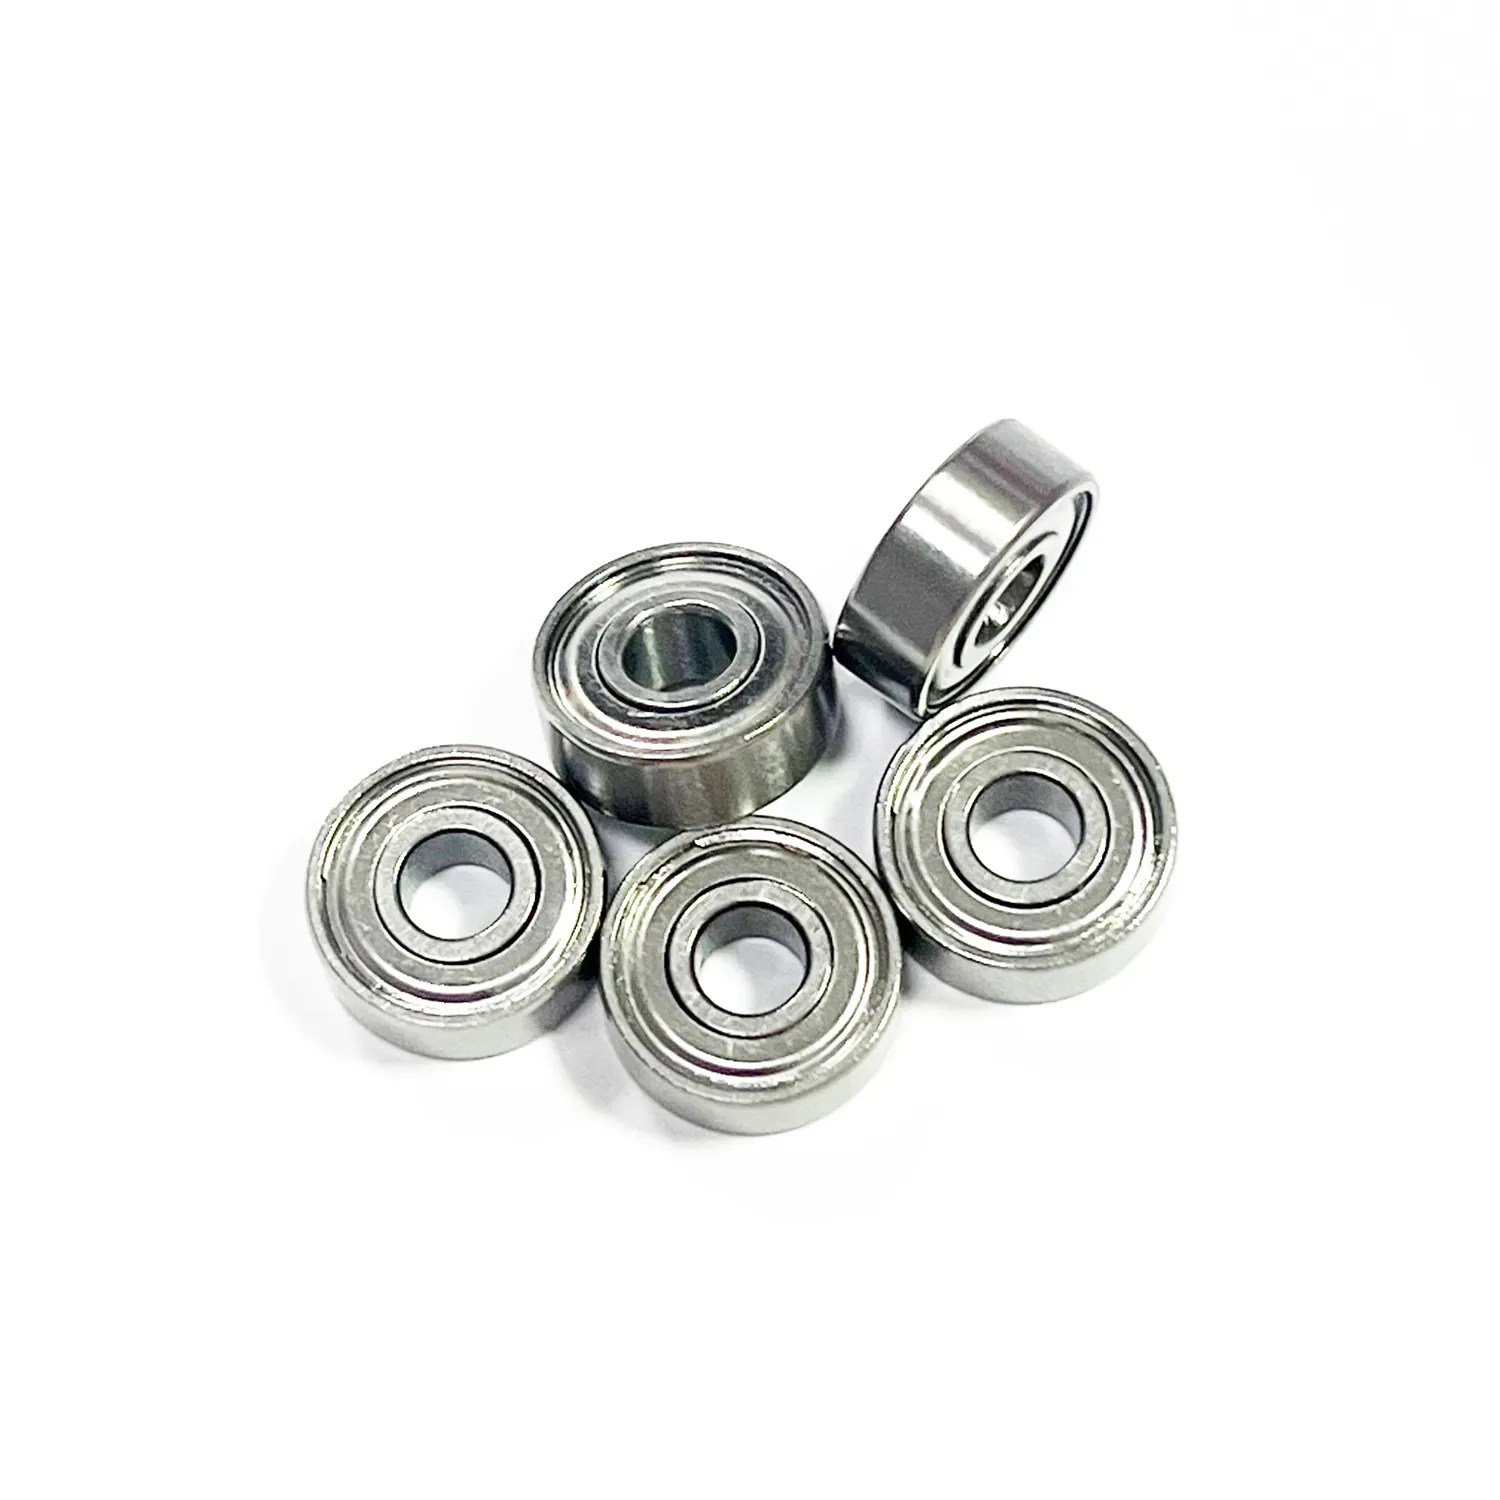 Hot Selling S 694 zz 2 Rs 4 * 11 * 4 Mm Mini Bearings Stainless Steel Bearing for Aircraft Model Motor